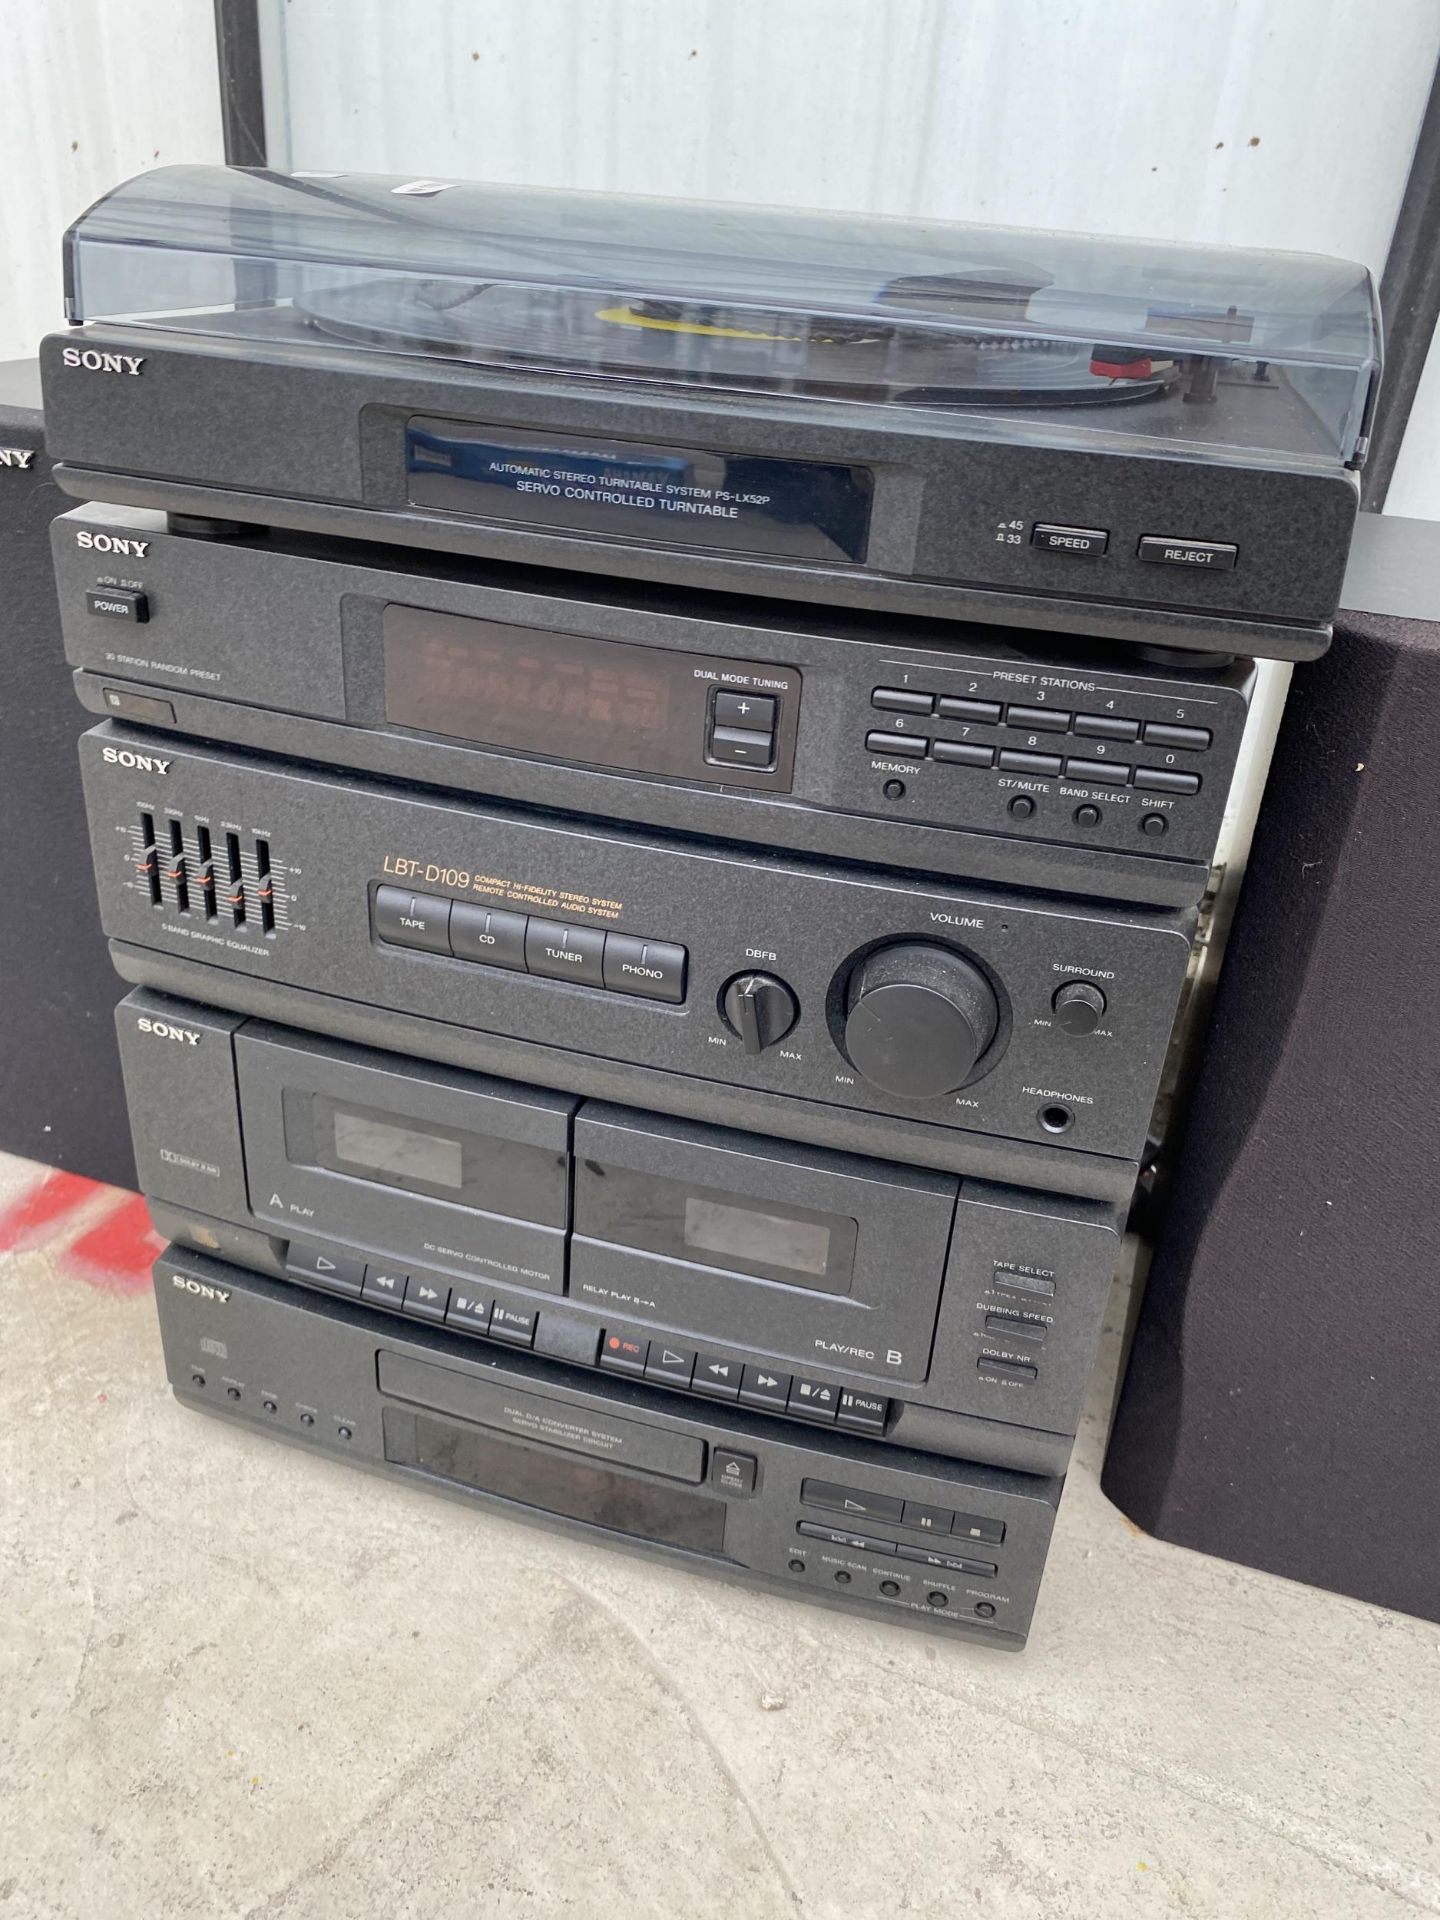 A SONY LBT D109 FIVE PIECE STEREO SYSTEM WITH SPEAKERS - Image 2 of 3